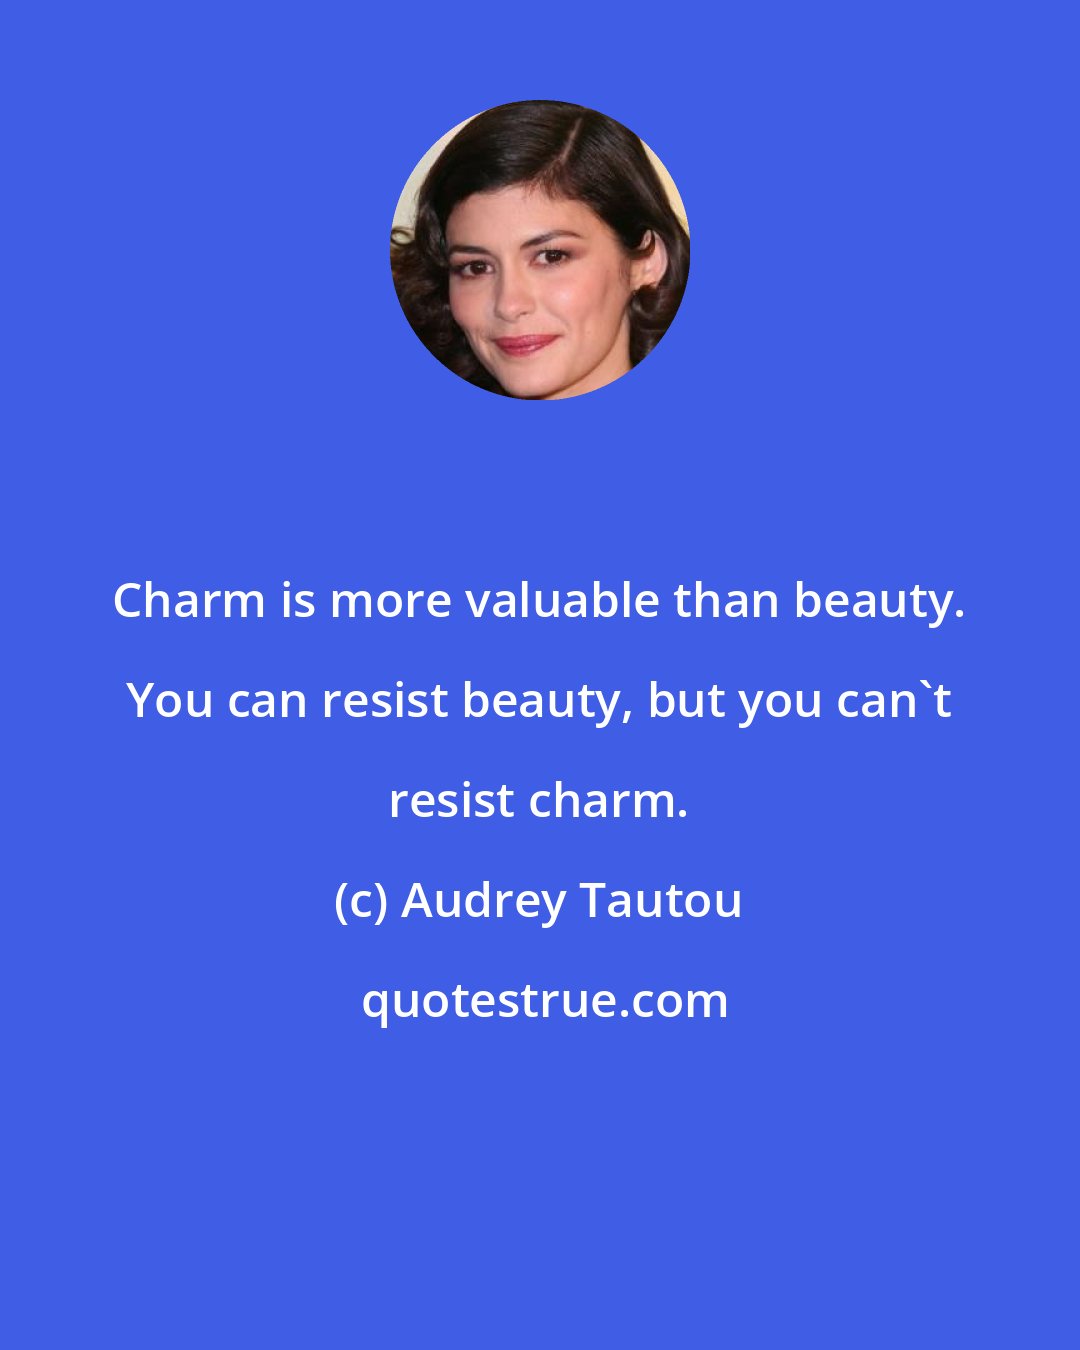 Audrey Tautou: Charm is more valuable than beauty. You can resist beauty, but you can't resist charm.